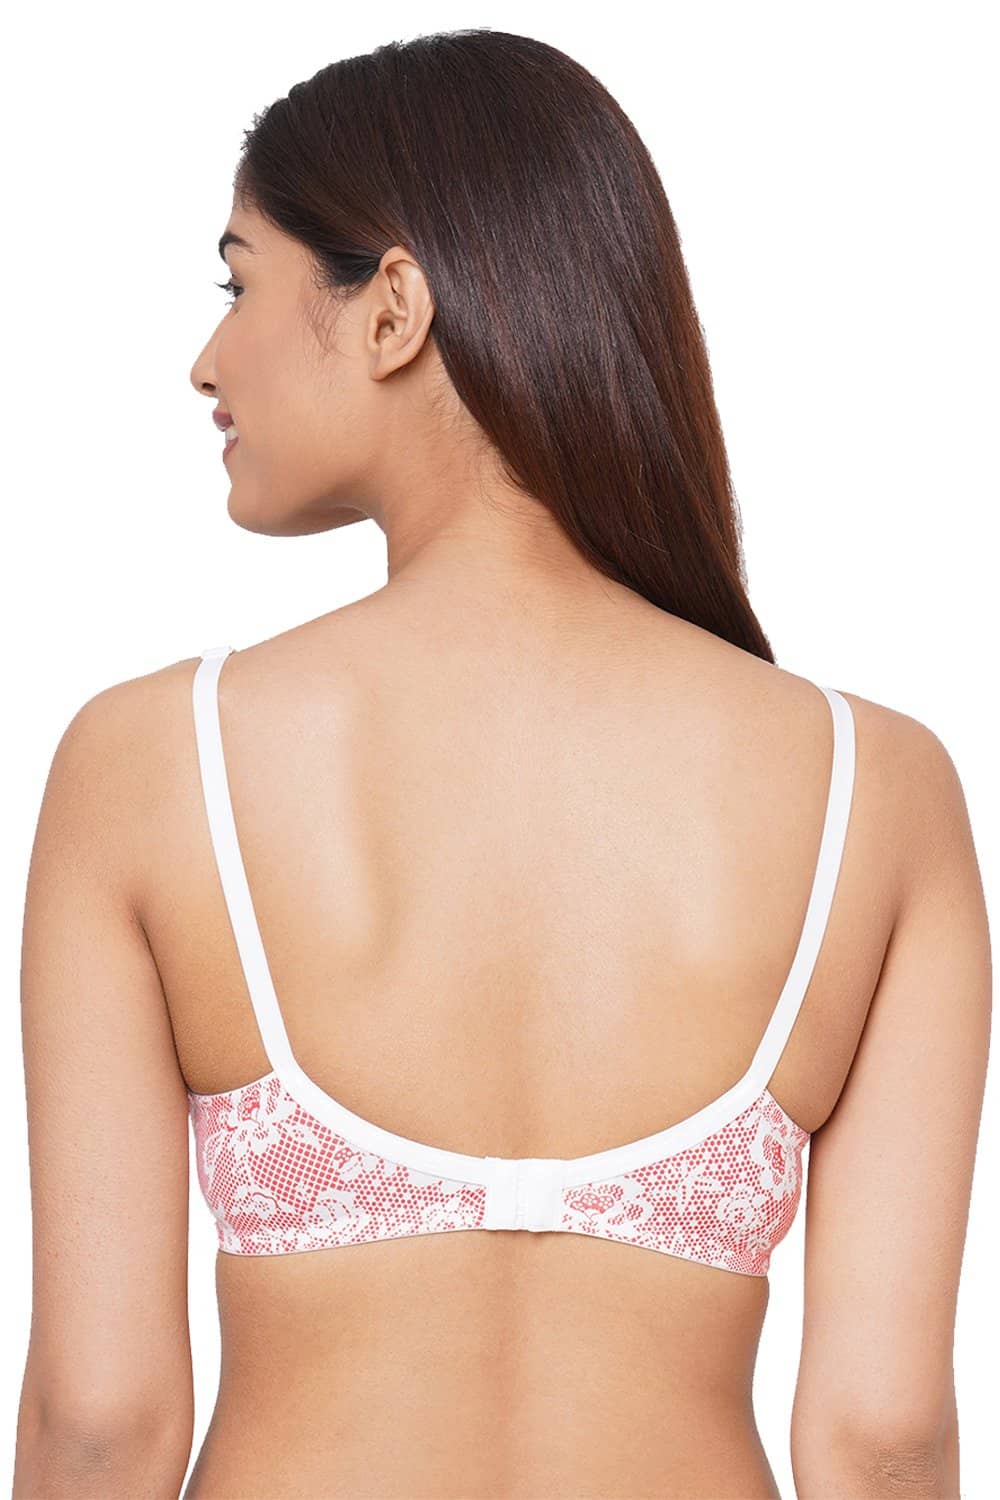 Organic Cotton  Antimicrobial  Seamless Side Support Bra (Pack of 2)-ISB057-Pink Lace Print_Skin-